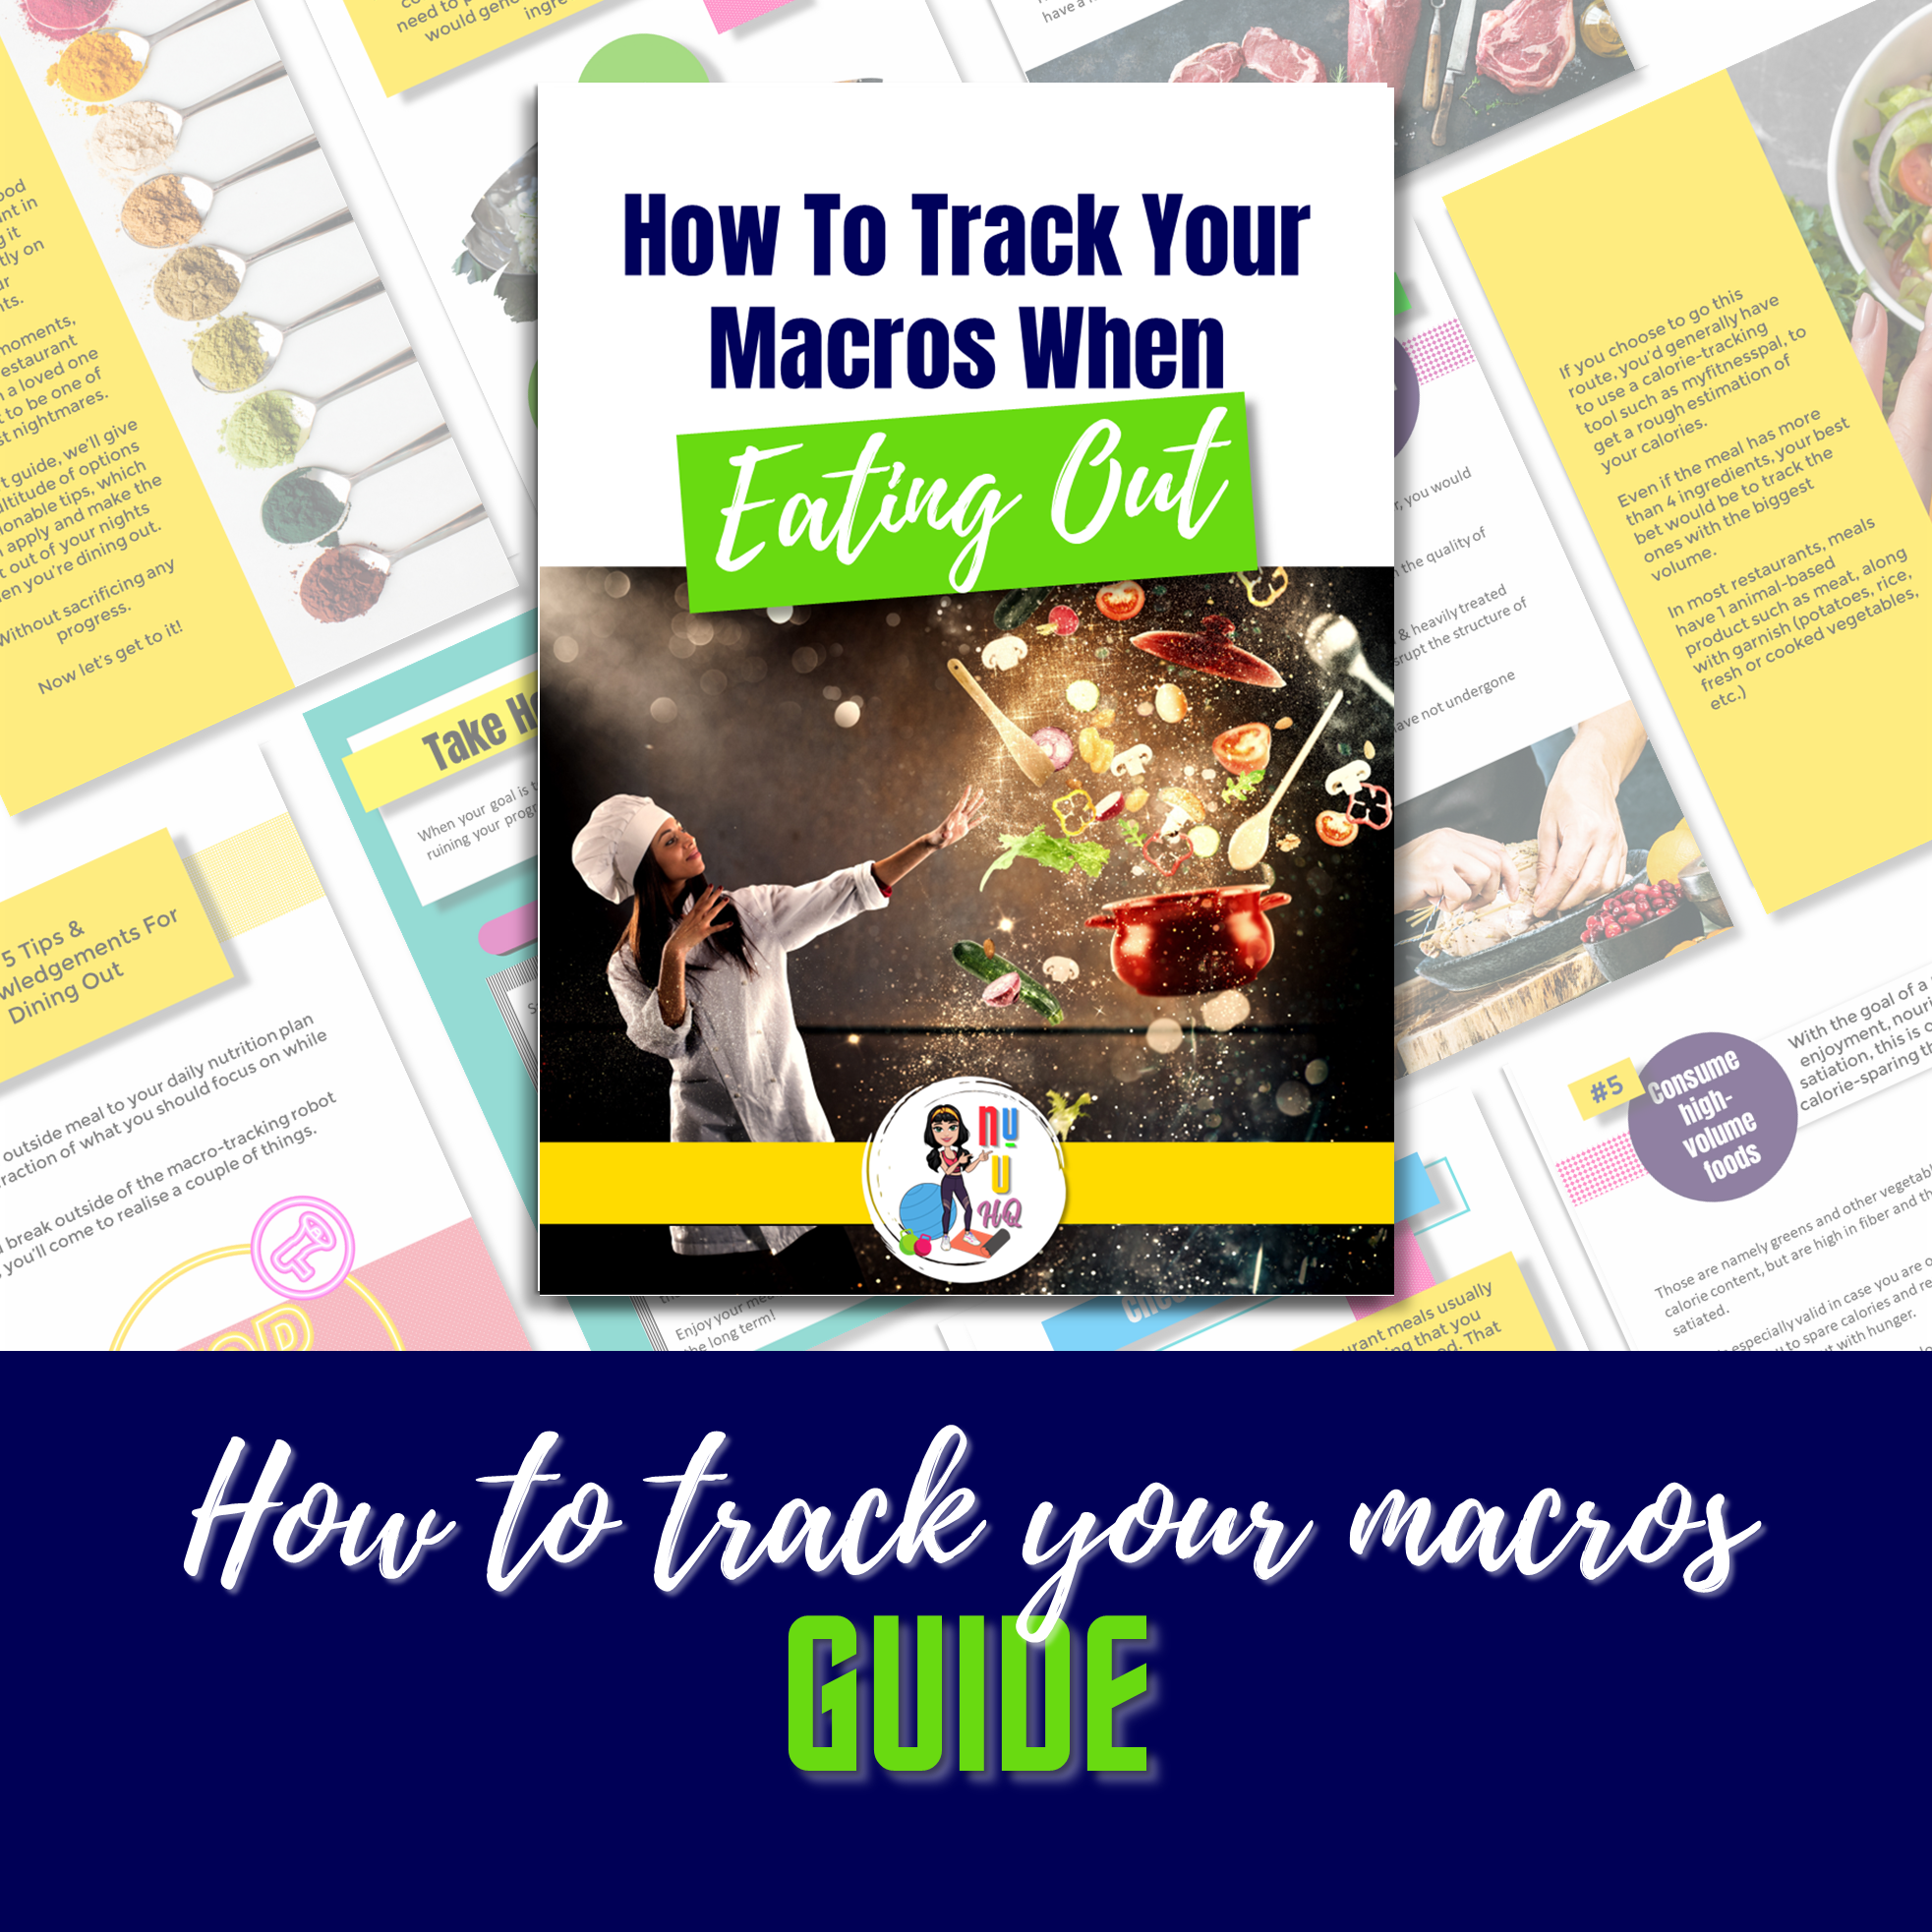 How to track your macros when eating out guide